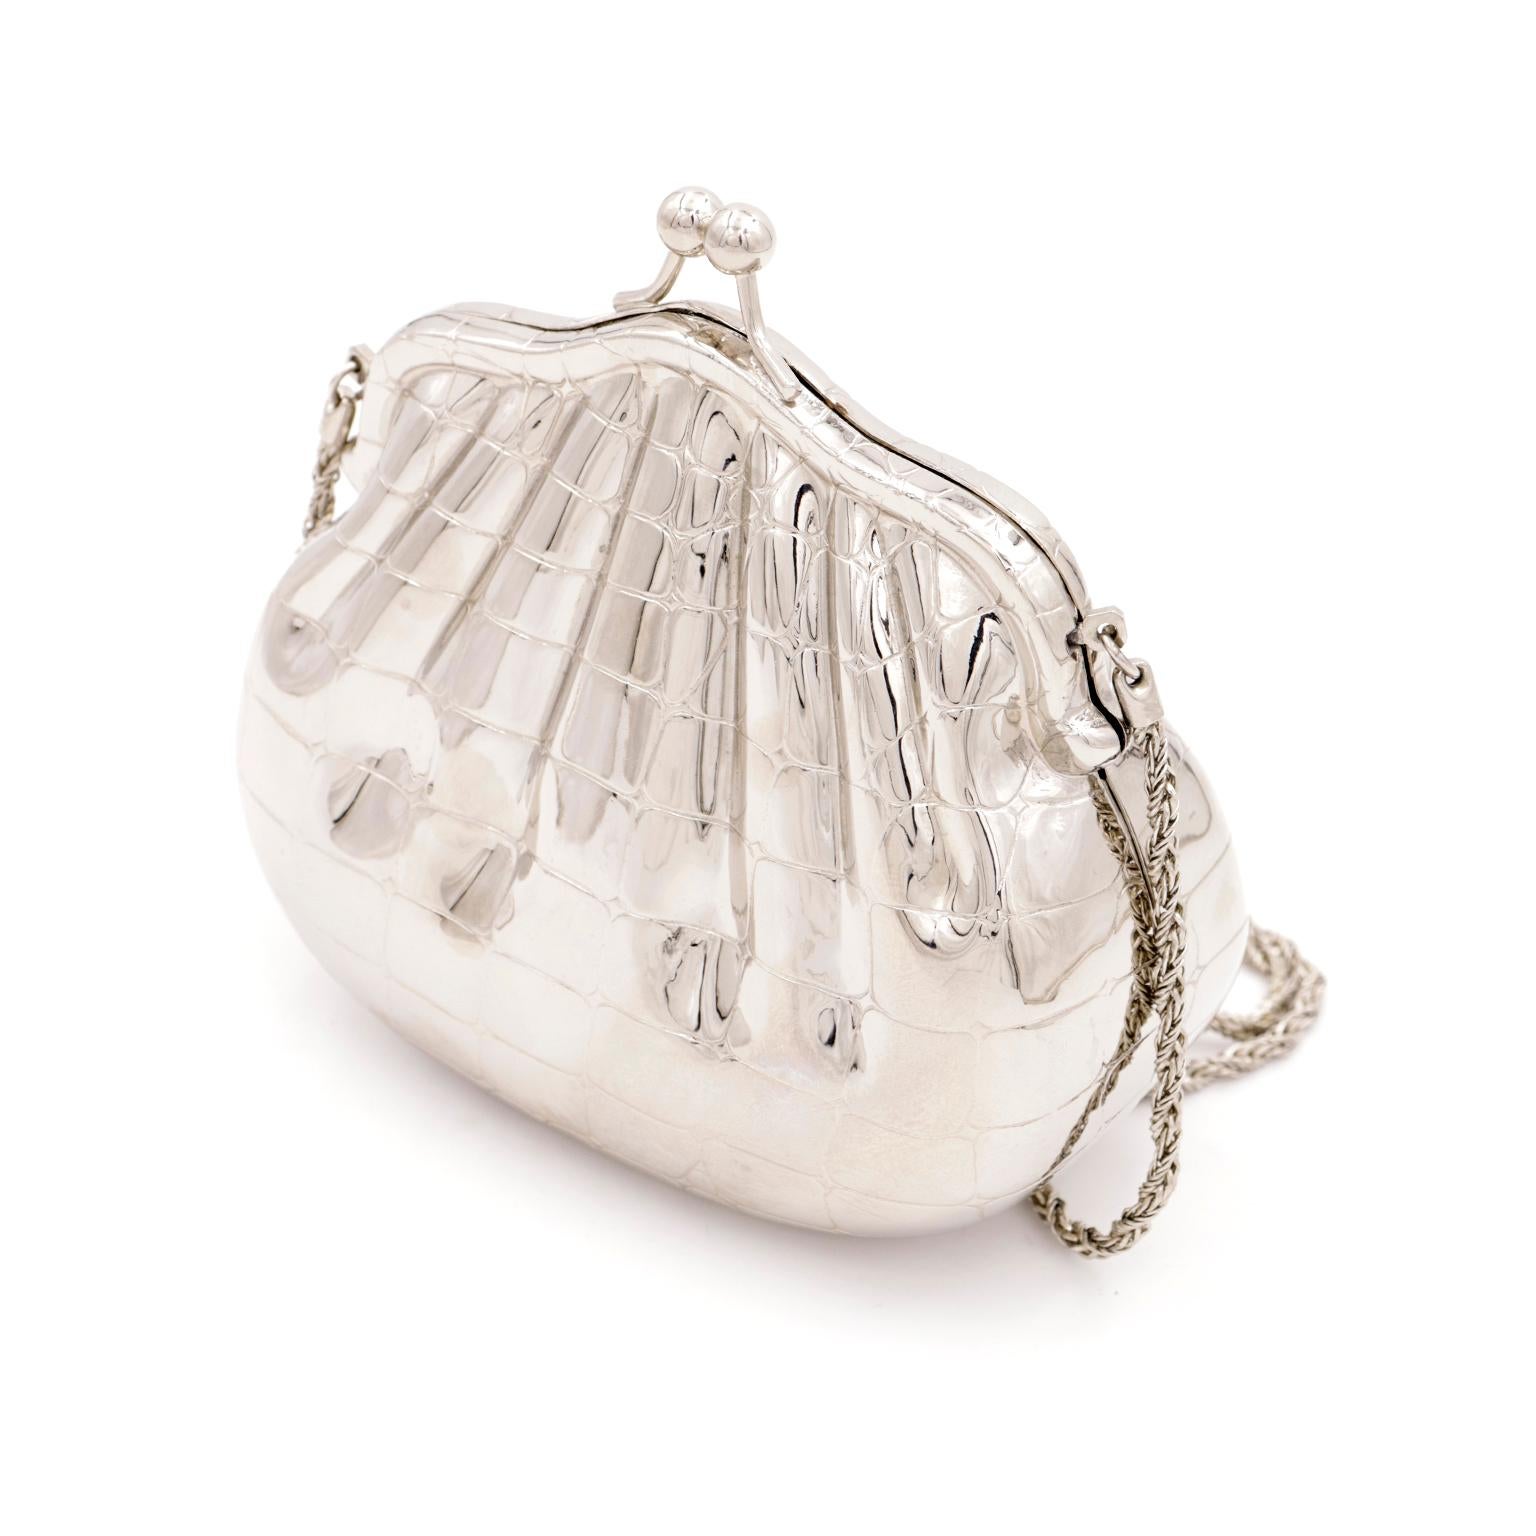 We love this vintage 1980s alligator embossed silver plated handbag with the interesting faux gathering & a kiss lock clasp. This bag was made in the 1980's in Italy for Nordstrom and it is such a unique vintage handbag. The unusual faux gathering